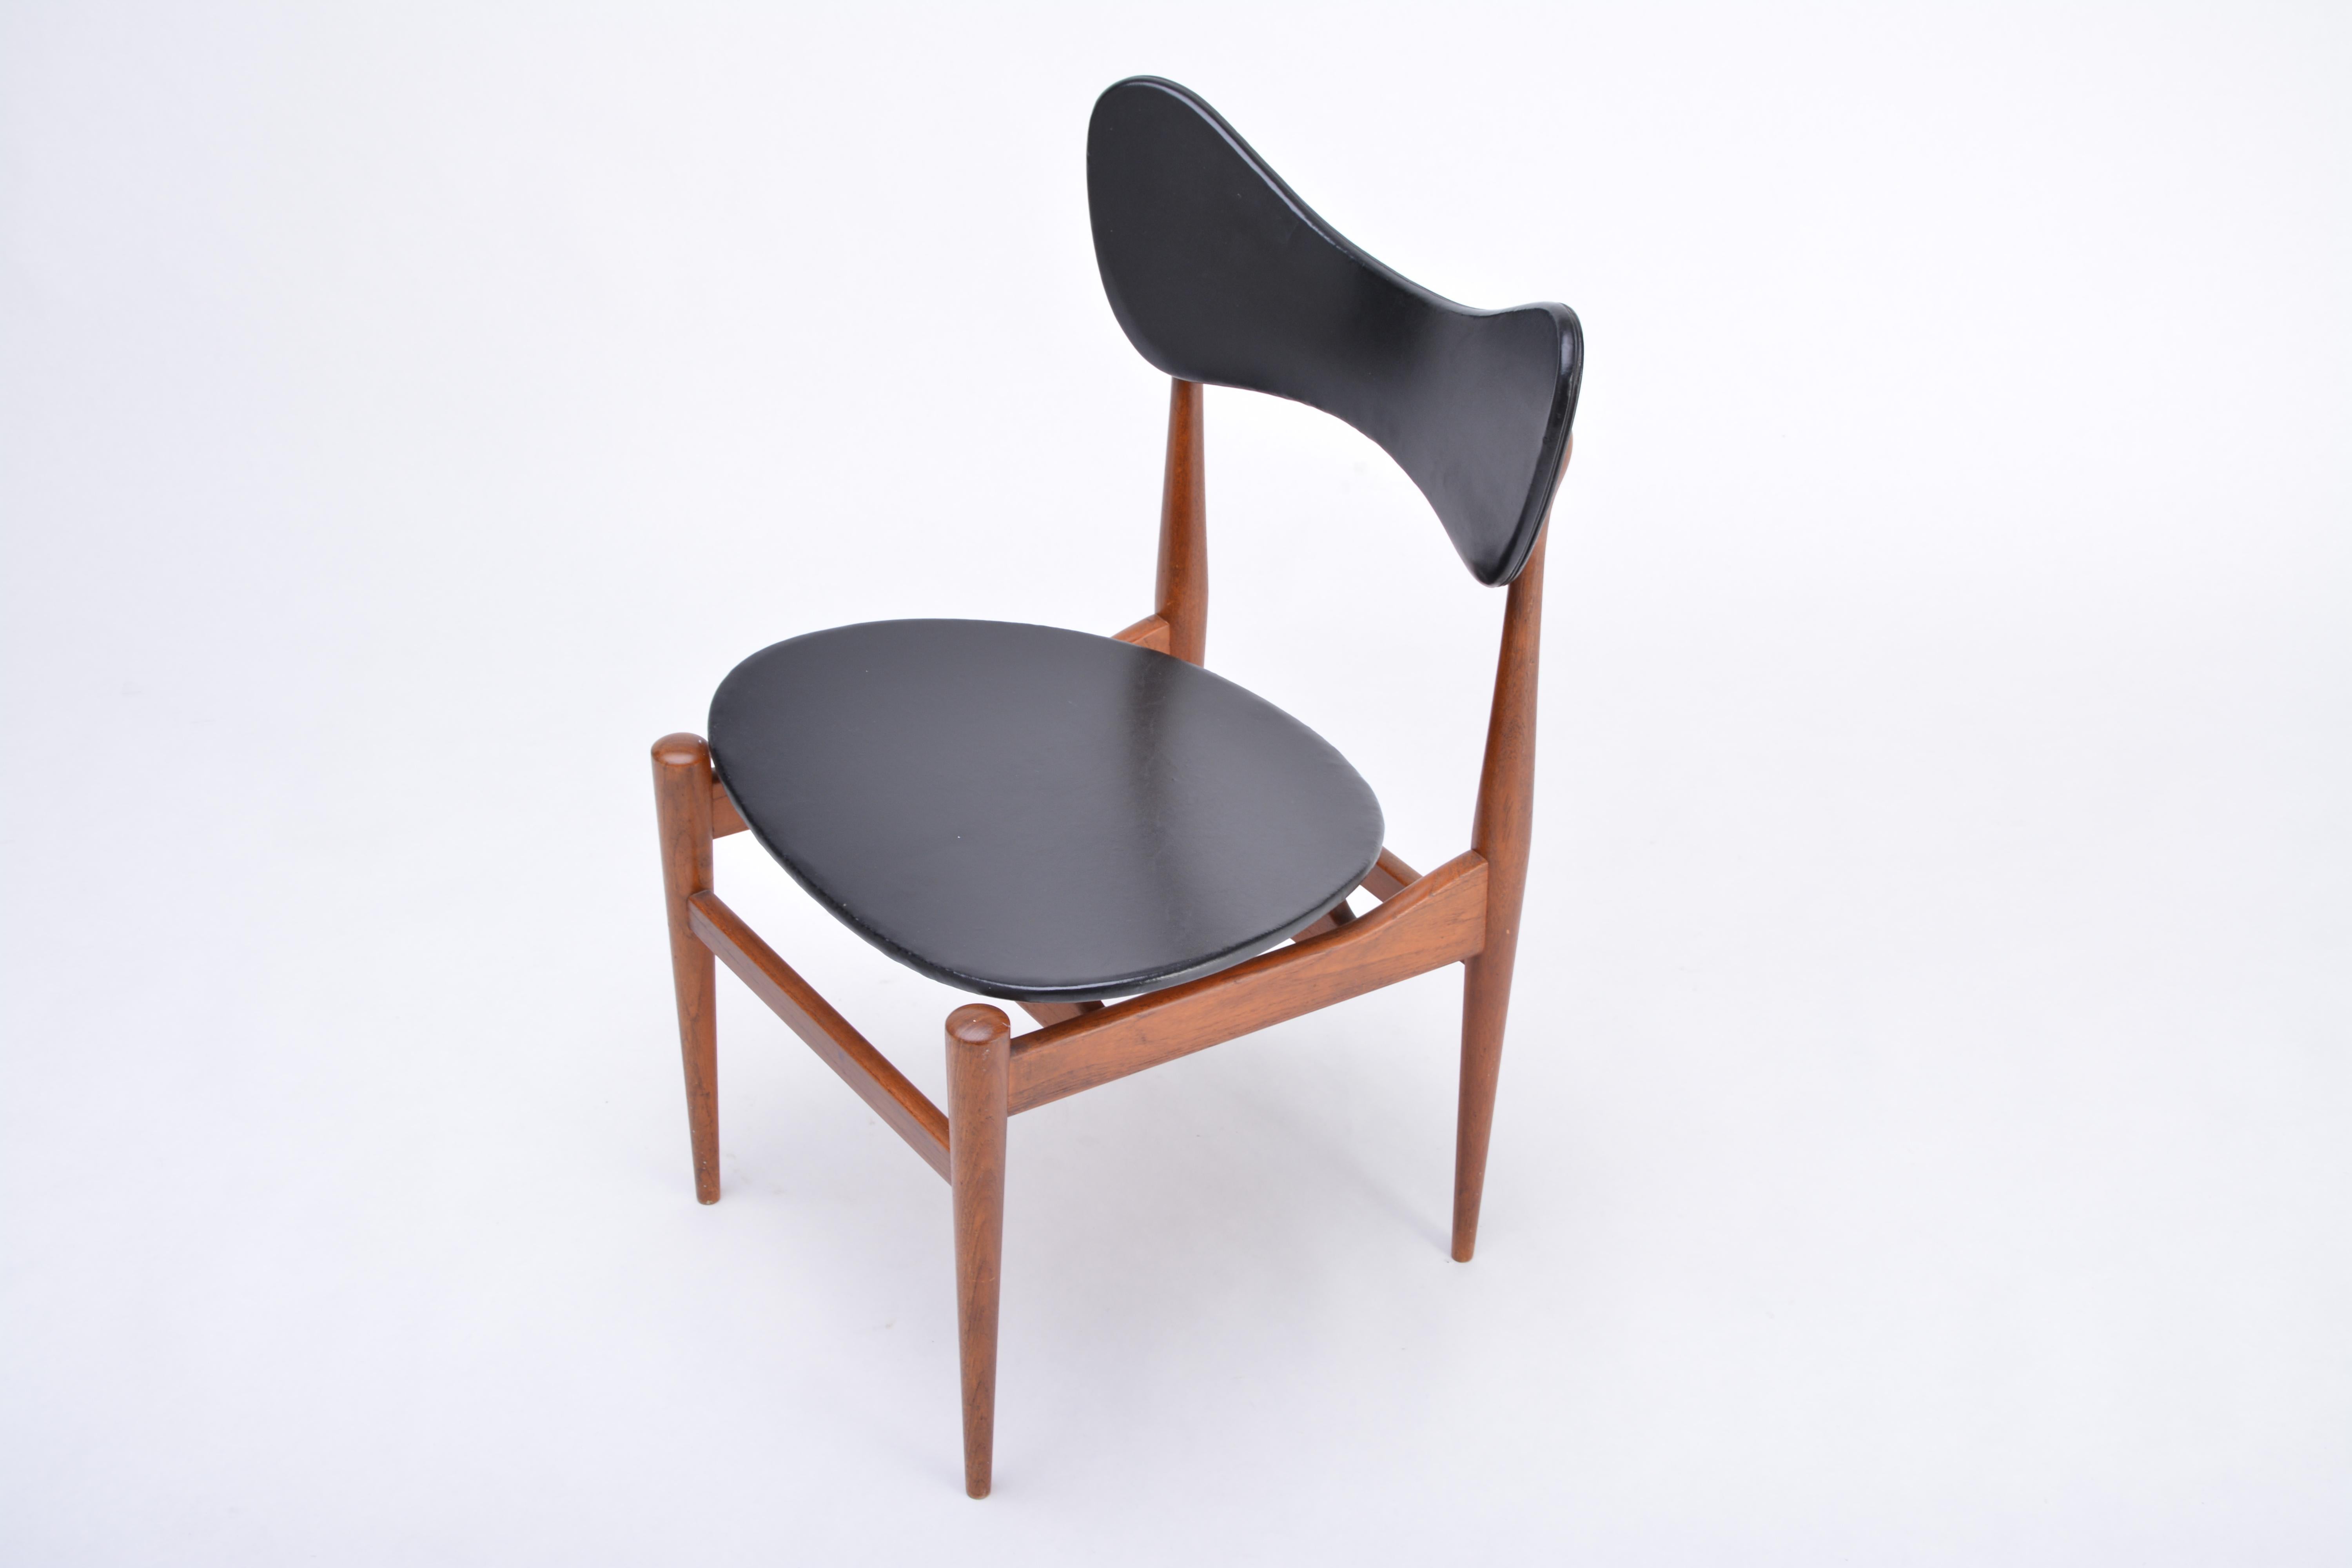 Faux Leather Rare Mid-Century Modern Butterfly chair by Inge & Luciano Rubino, 1963 For Sale